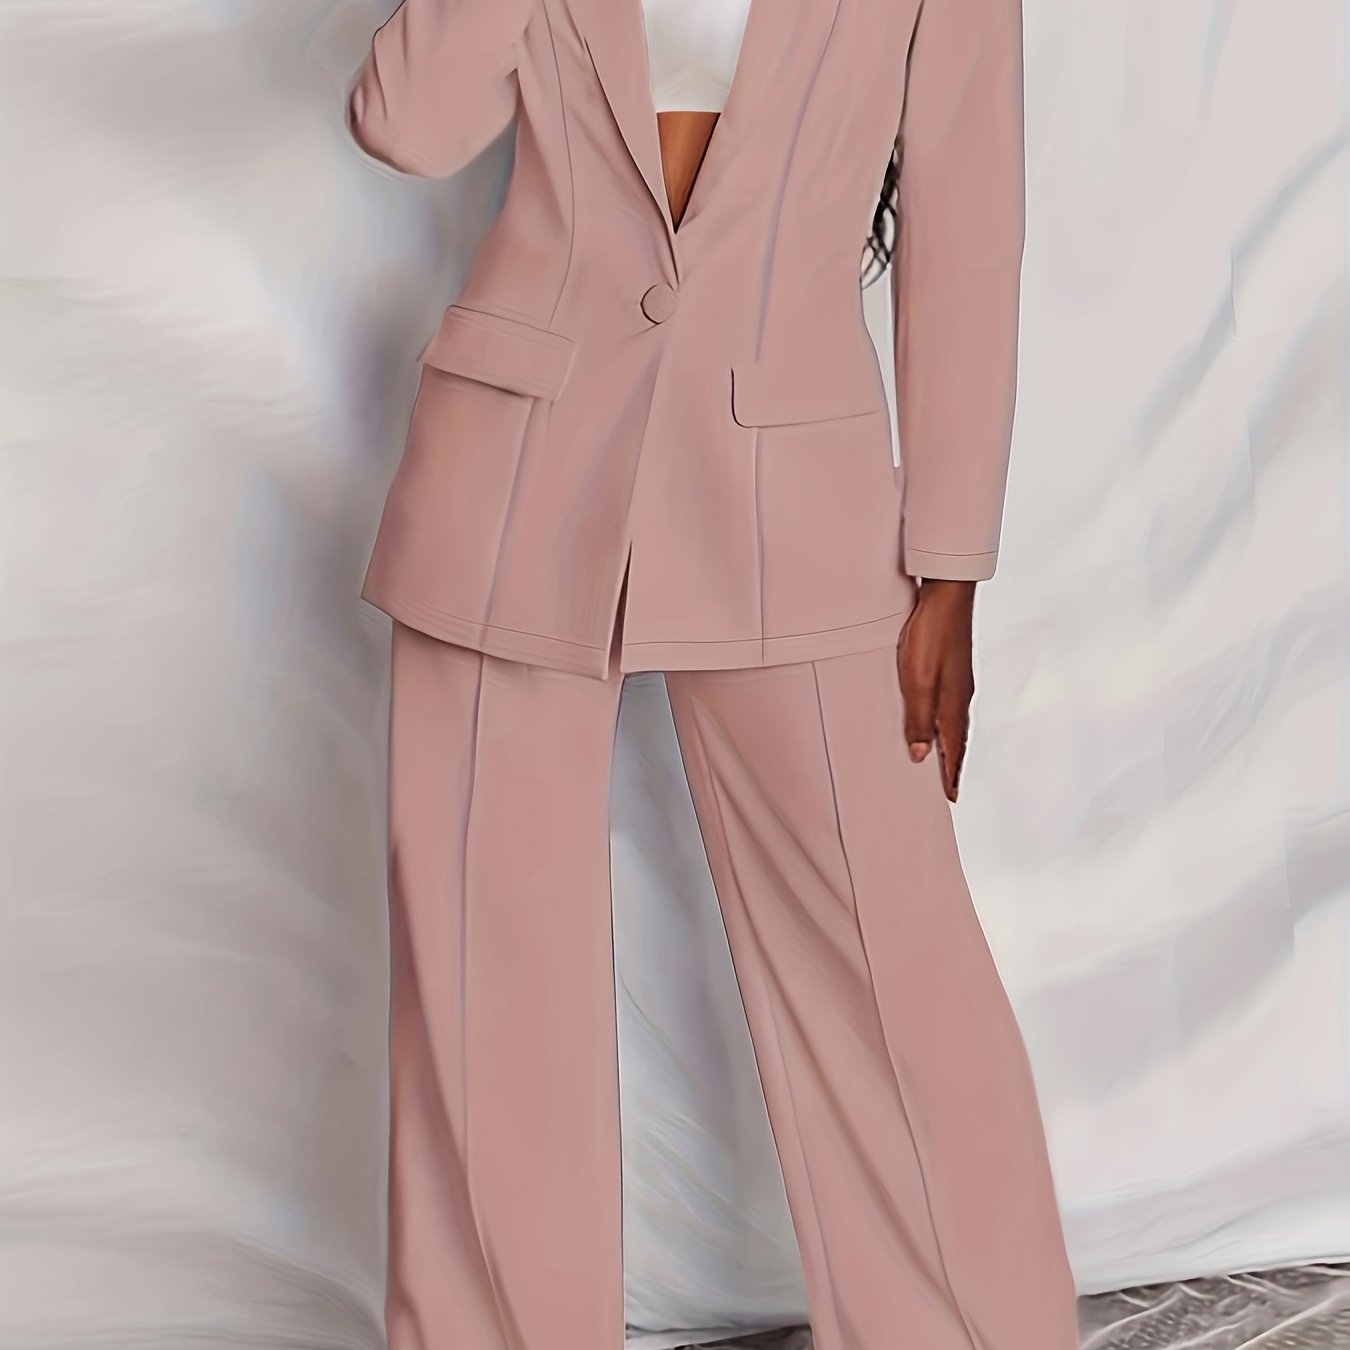 Dusty Pink Pantsuit for Women, Pink Formal Pantsuit for Office, Business Suit  Womens, Light Pink Blazer Trouser Suit for Women 